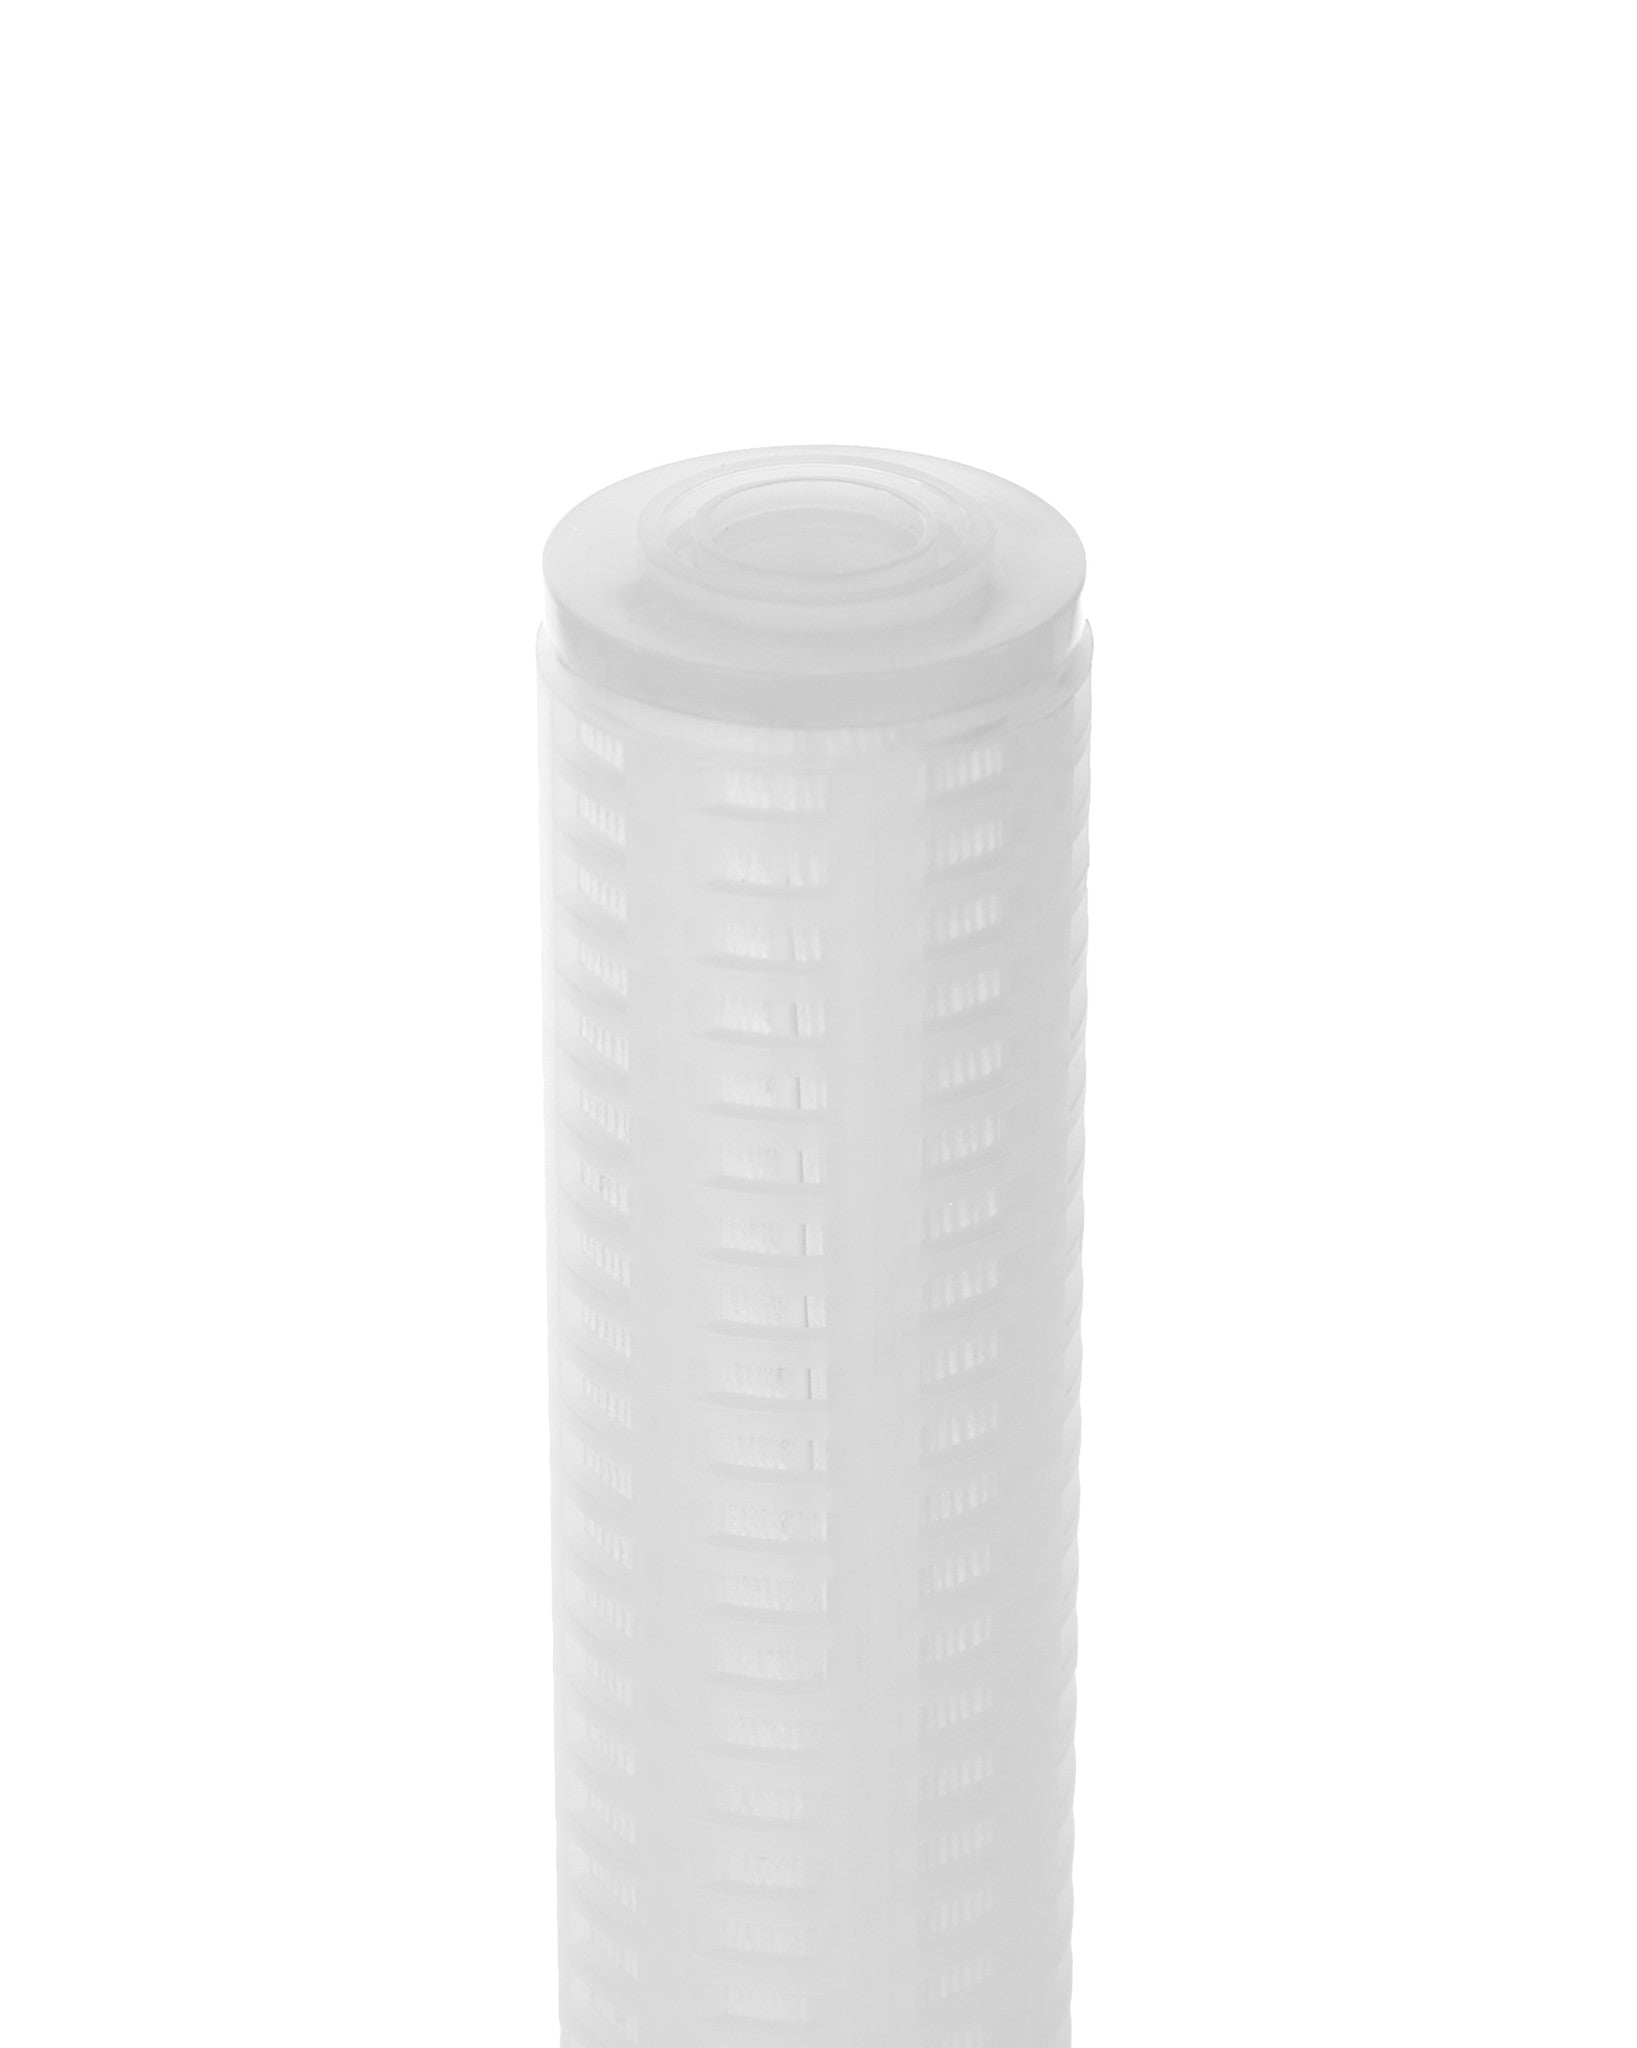 Filtersource.com Pleated Microglass Filter Cartridge Pleated Filter Cartridge - Filtersource.com - 4